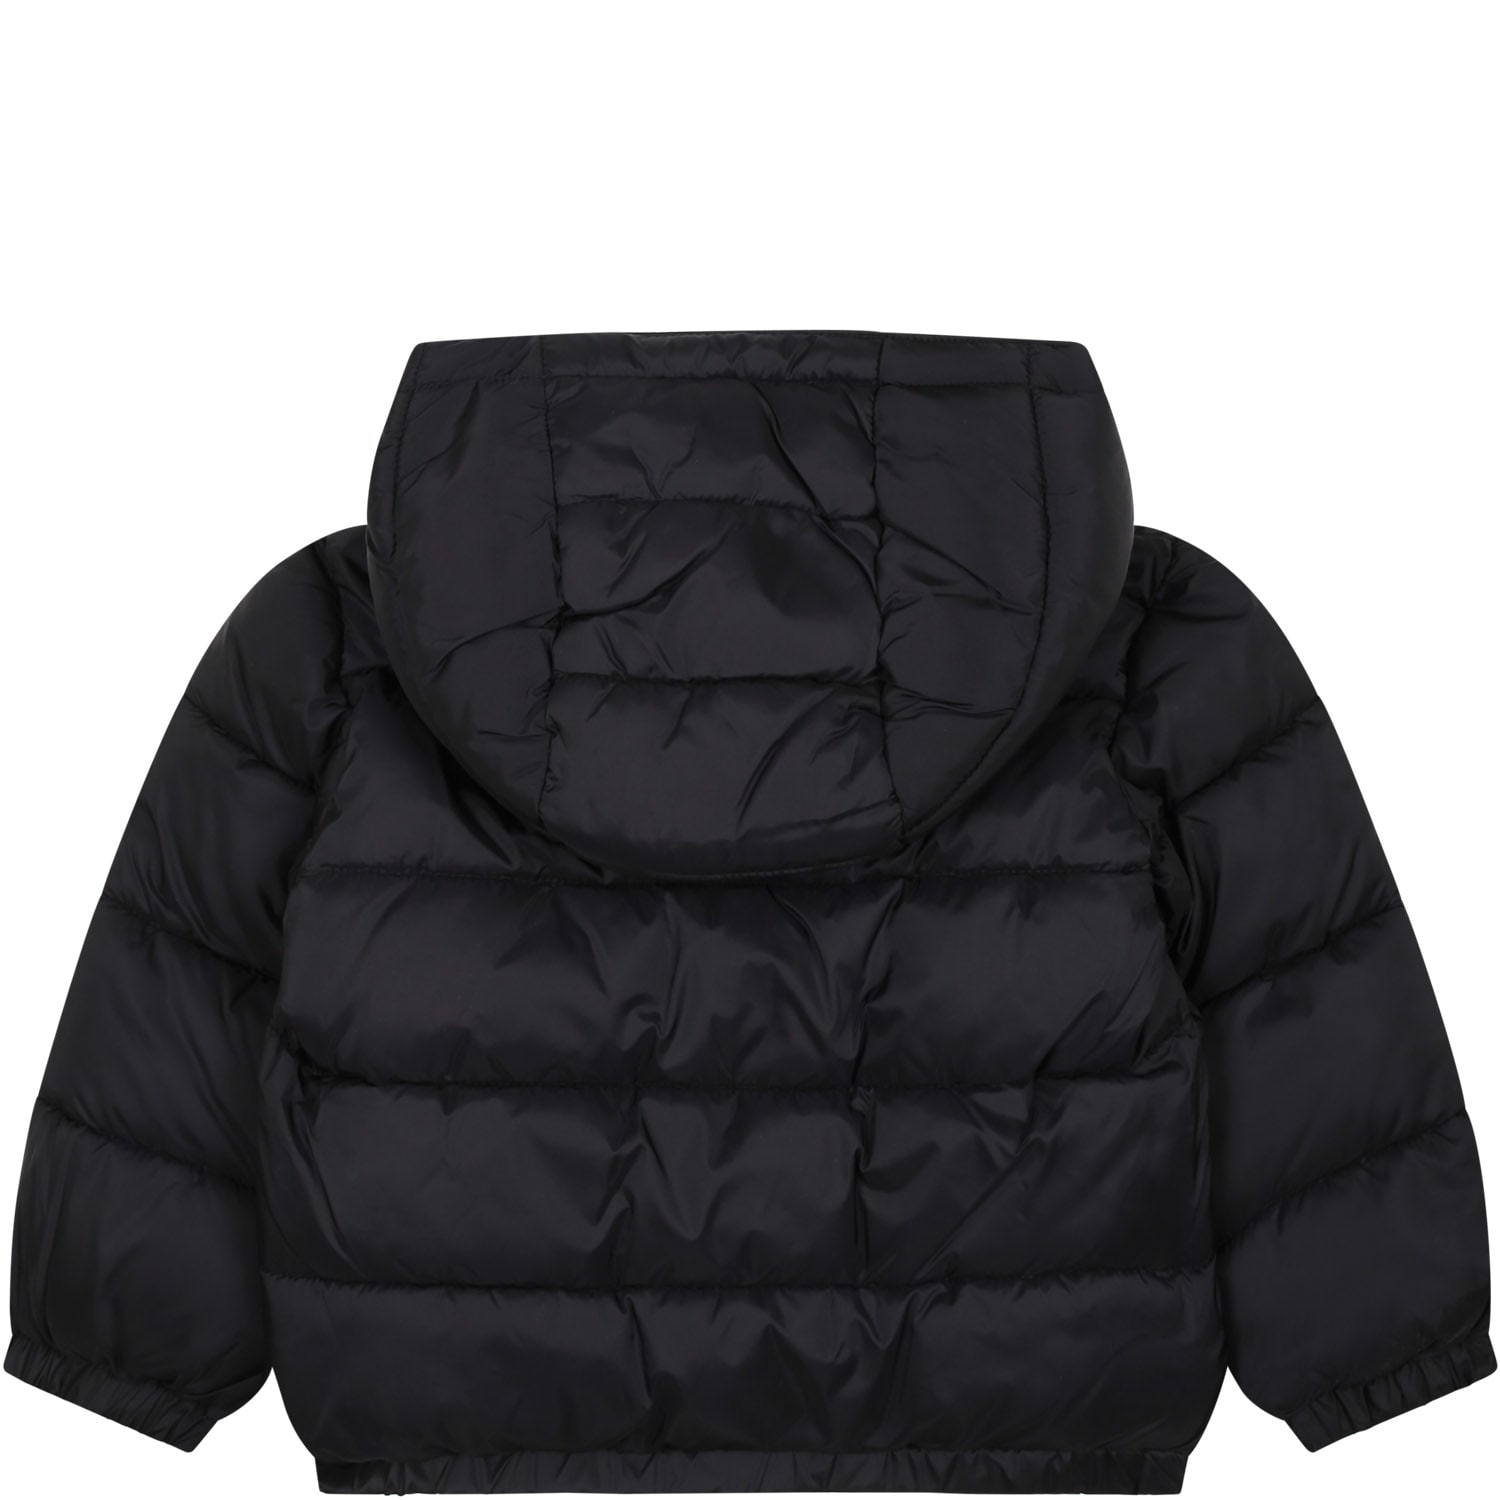 Shop Moschino Black Down Jacket For Babies With Teddy Bear And Logo